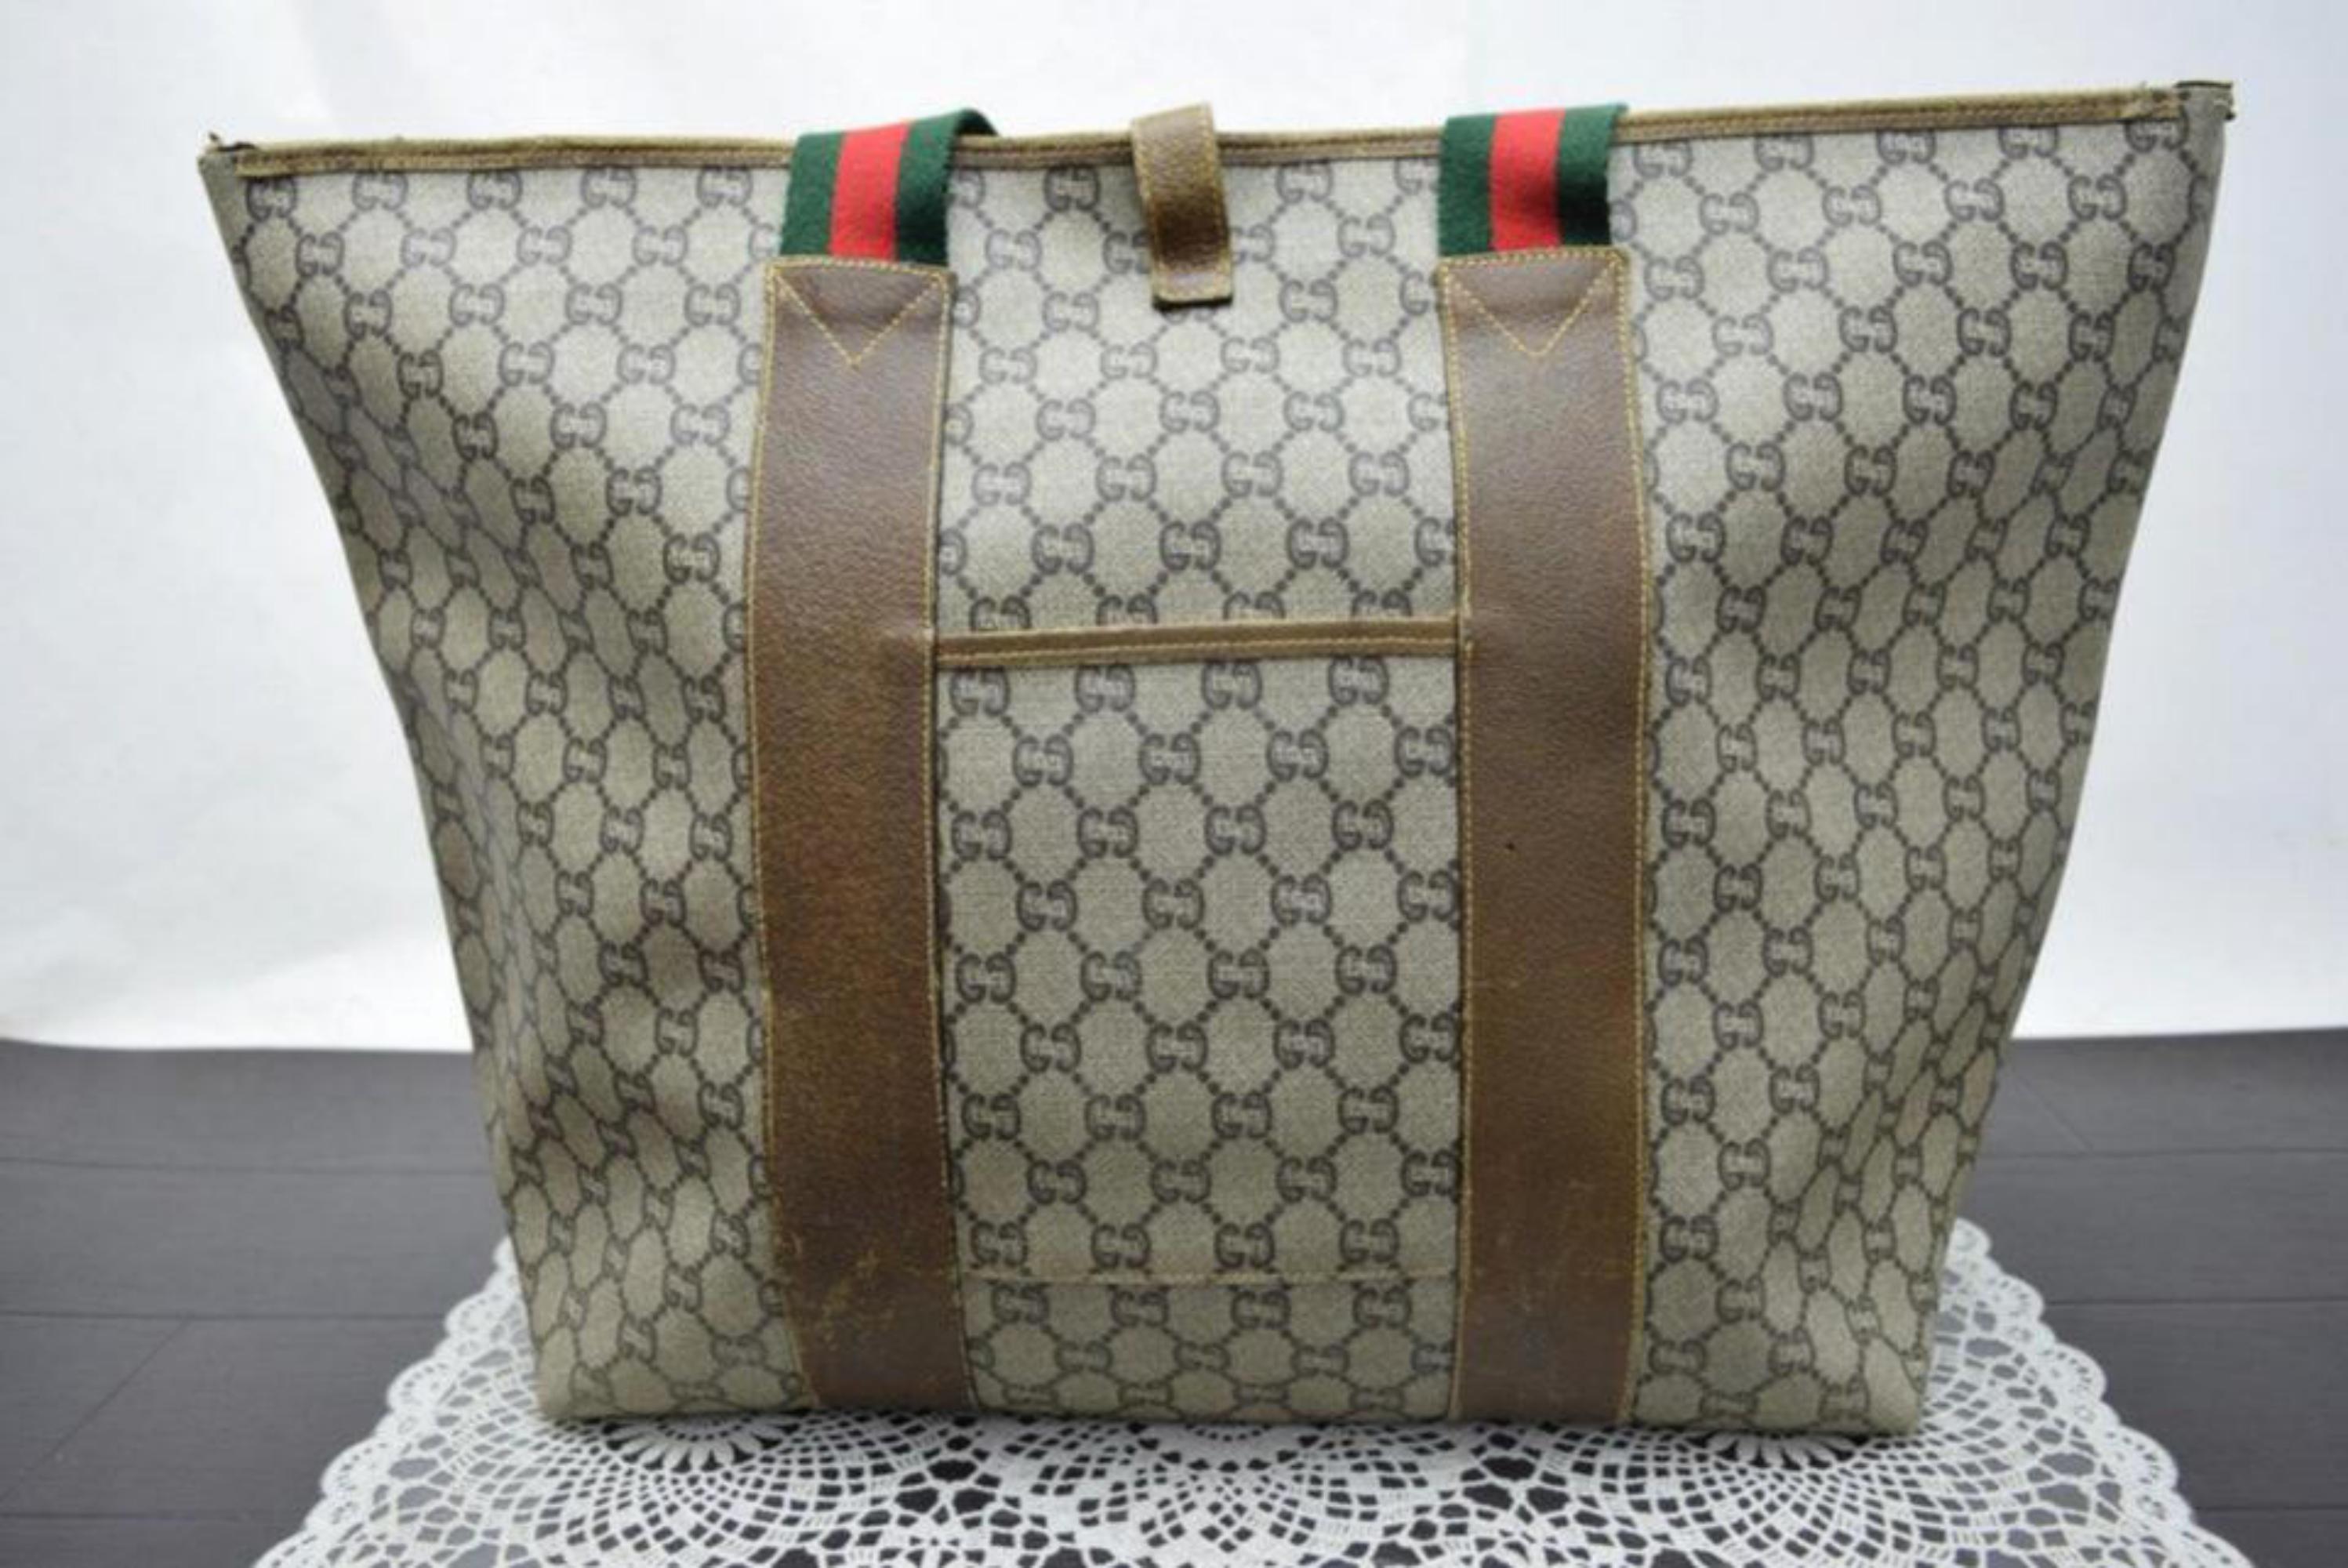 Gucci Bag Supreme Sherry Monogram Web Large Zip 868611 Brown Coated Canvas Tote In Fair Condition For Sale In Forest Hills, NY